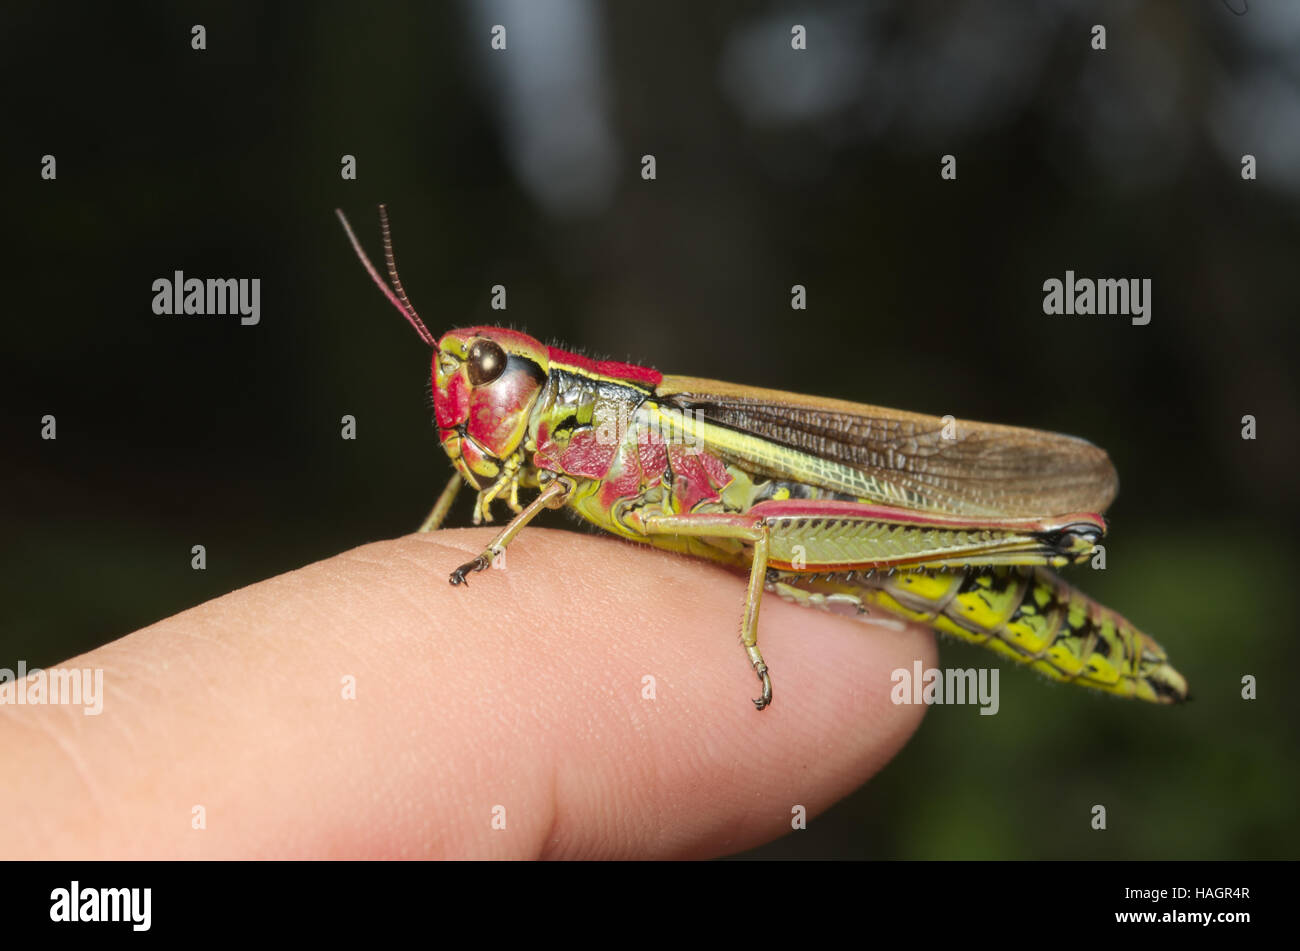 Mountain red and green grasshopper walking on a finger Stock Photo